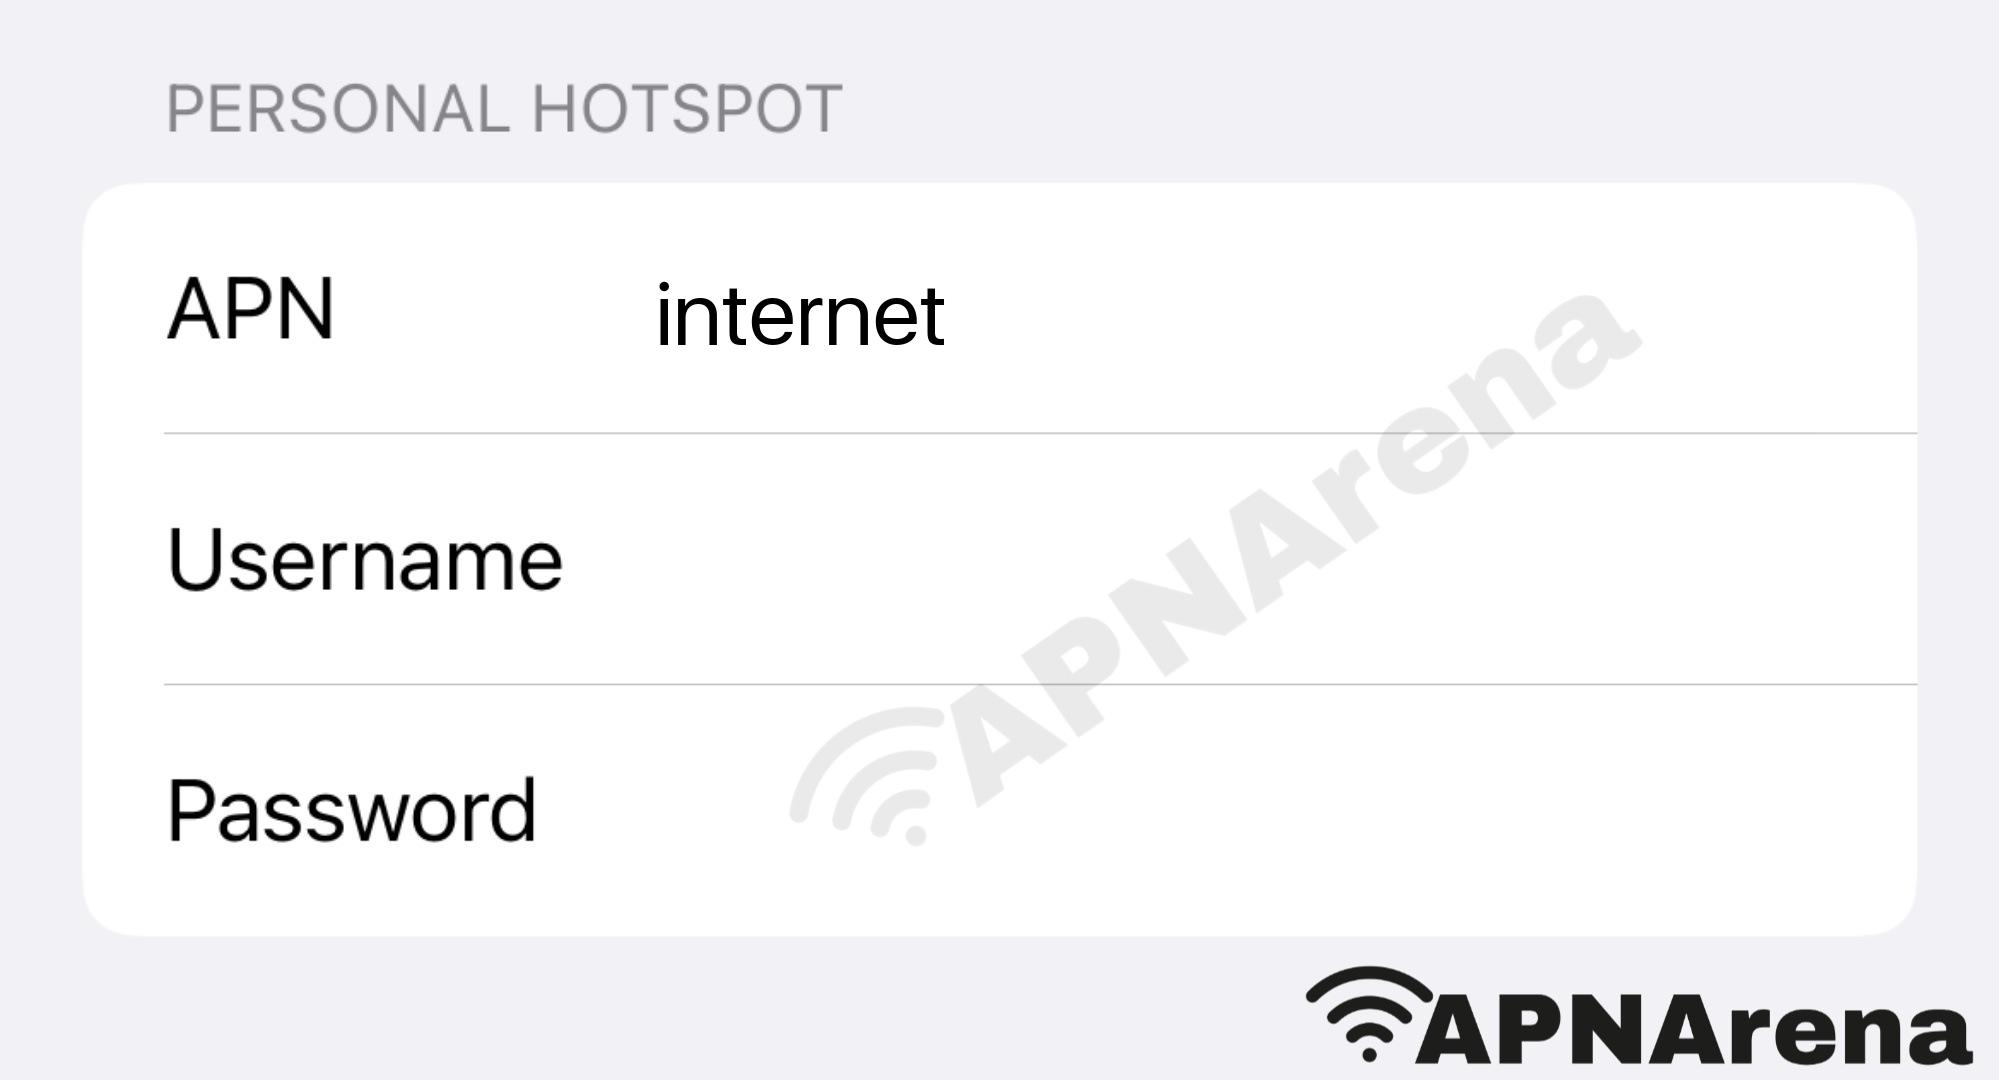 BYO Wireless Personal Hotspot Settings for iPhone